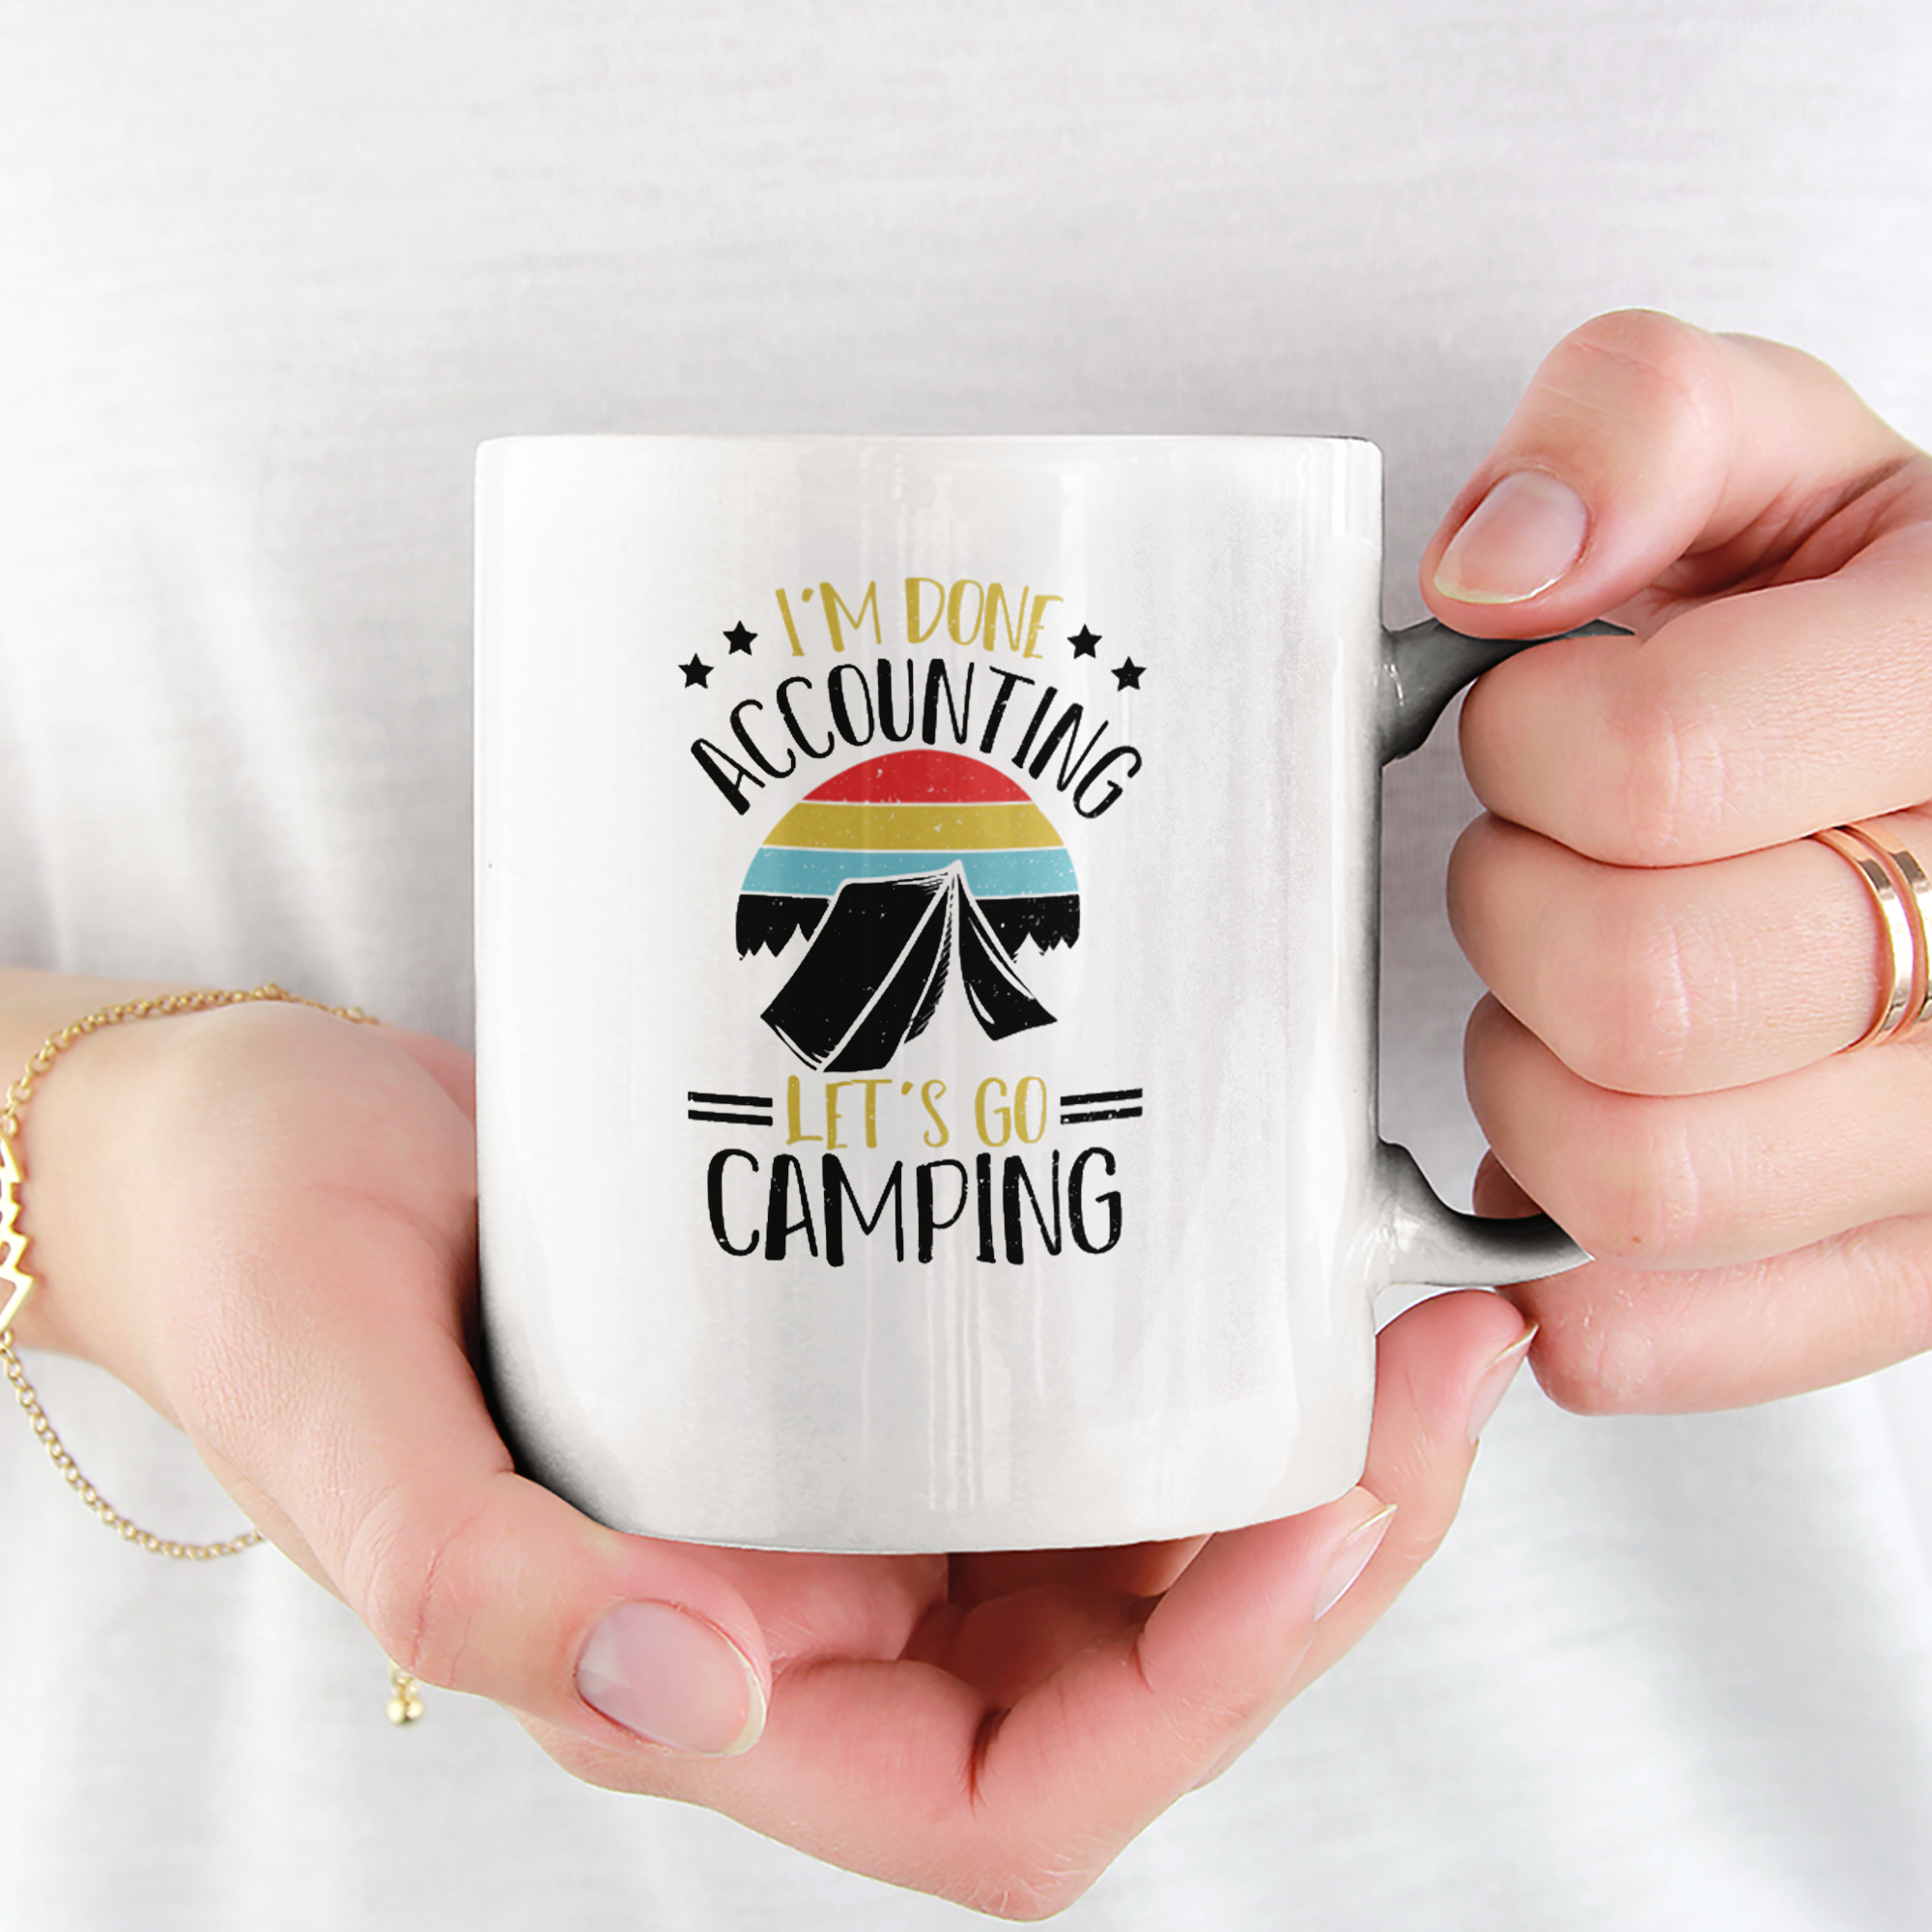 I'm Done Accounting Let's Go Camping Tasse - DESIGNSBYJNK5.COM